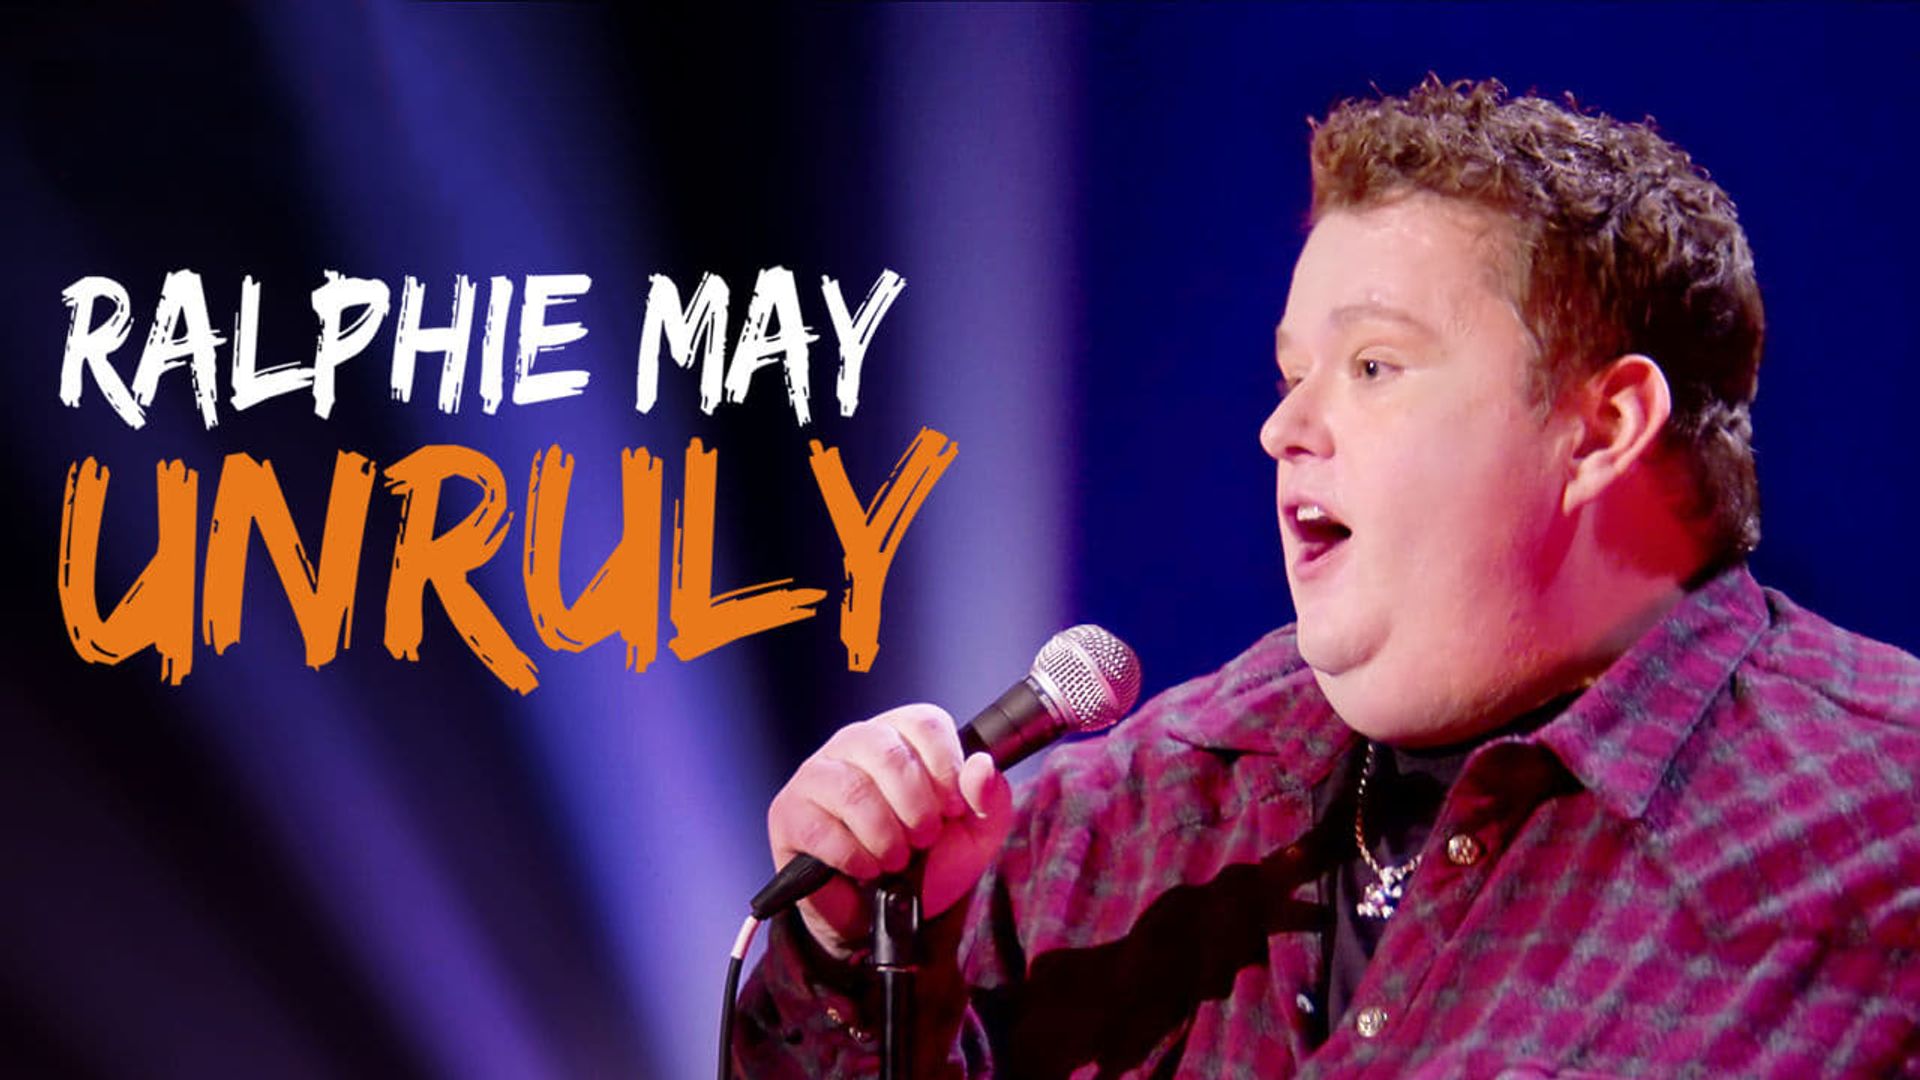 Ralphie May: Unruly Backdrop